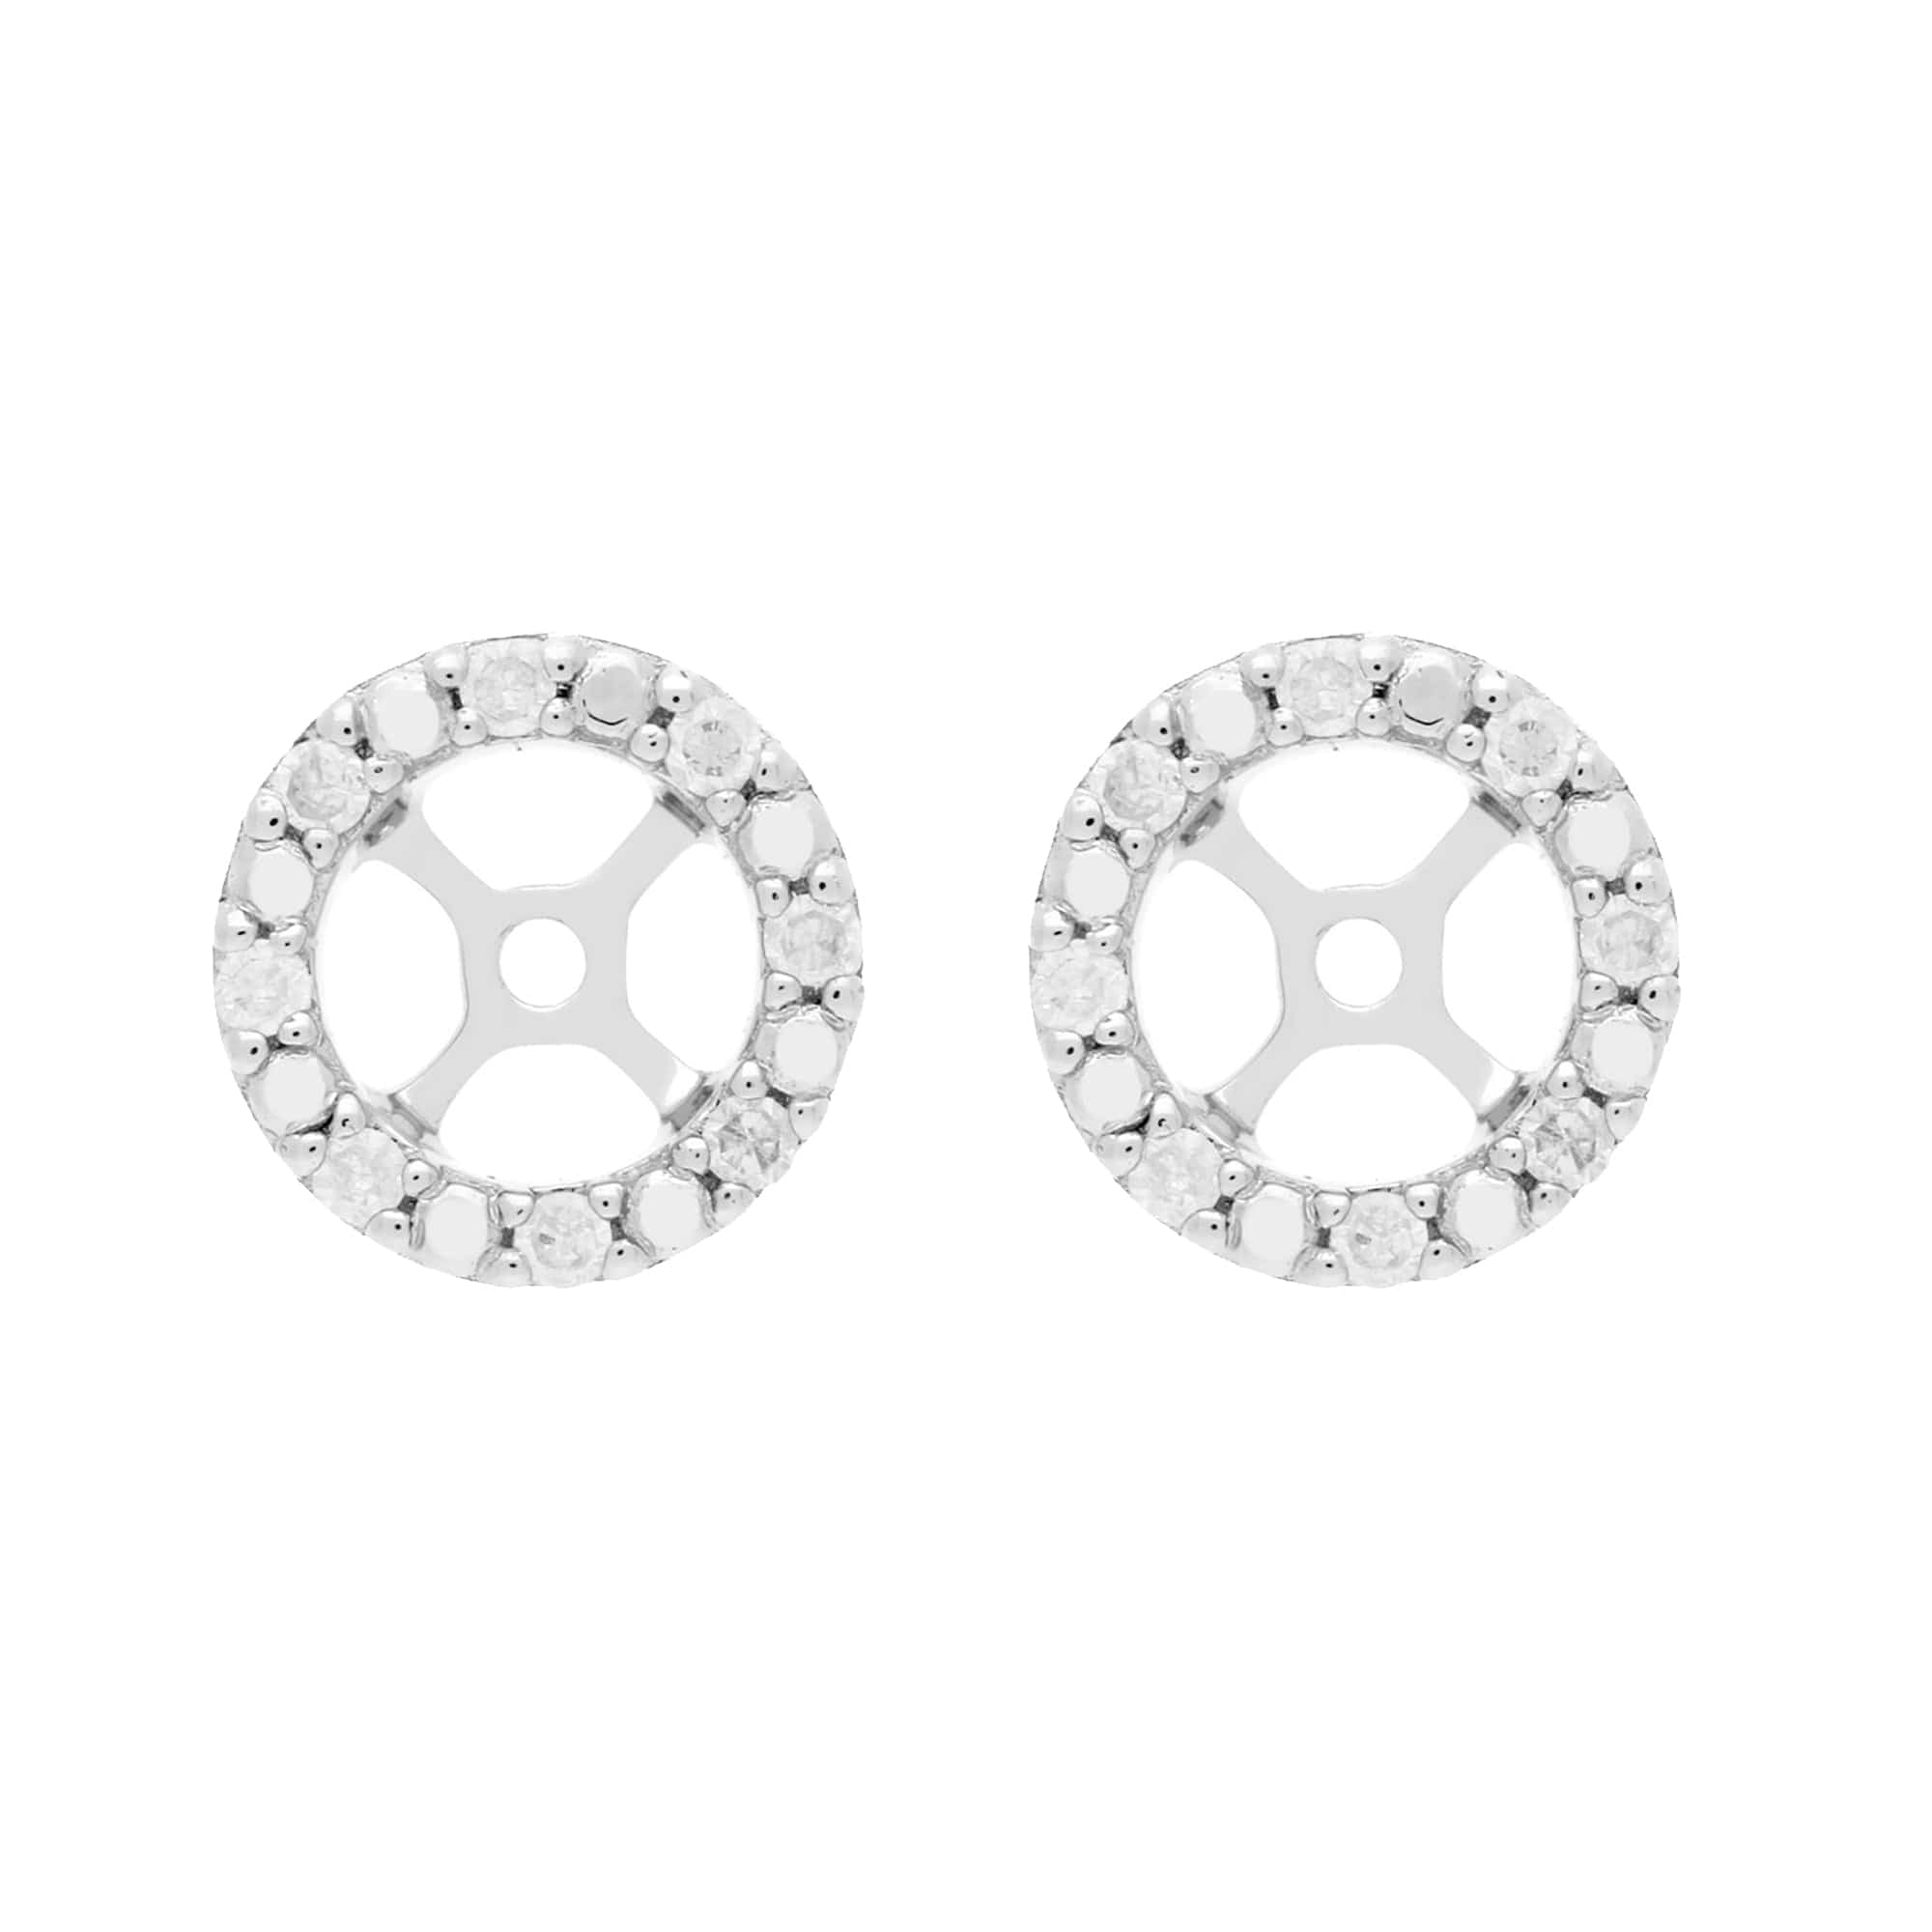 Classic Round Black Onyx Stud Earrings and Detachable Diamond Round Ear Jacket in 9ct White Gold - Gemondo